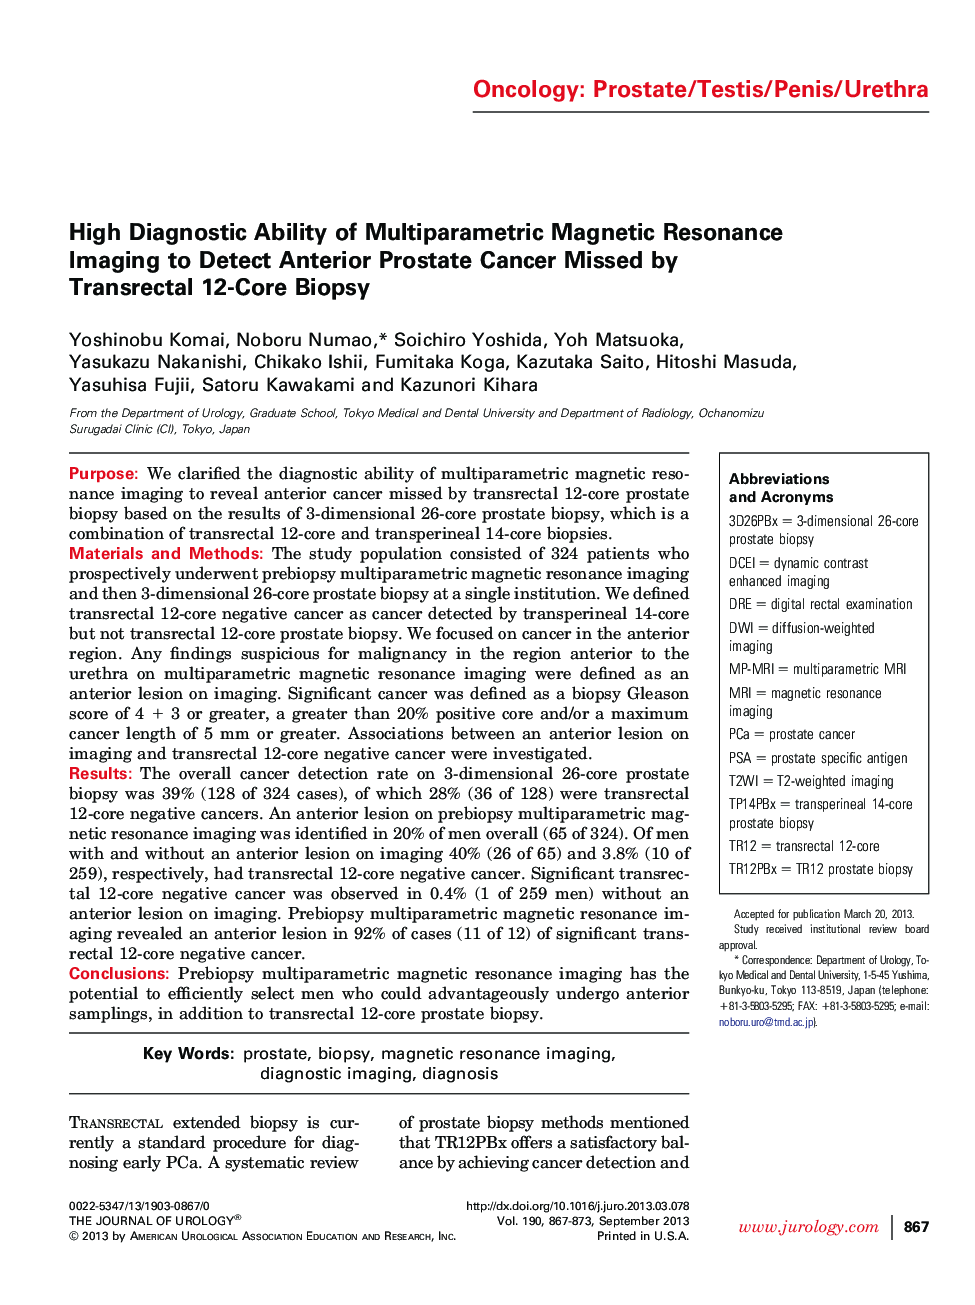 High Diagnostic Ability of Multiparametric Magnetic Resonance Imaging to Detect Anterior Prostate Cancer Missed by Transrectal 12-Core Biopsy 